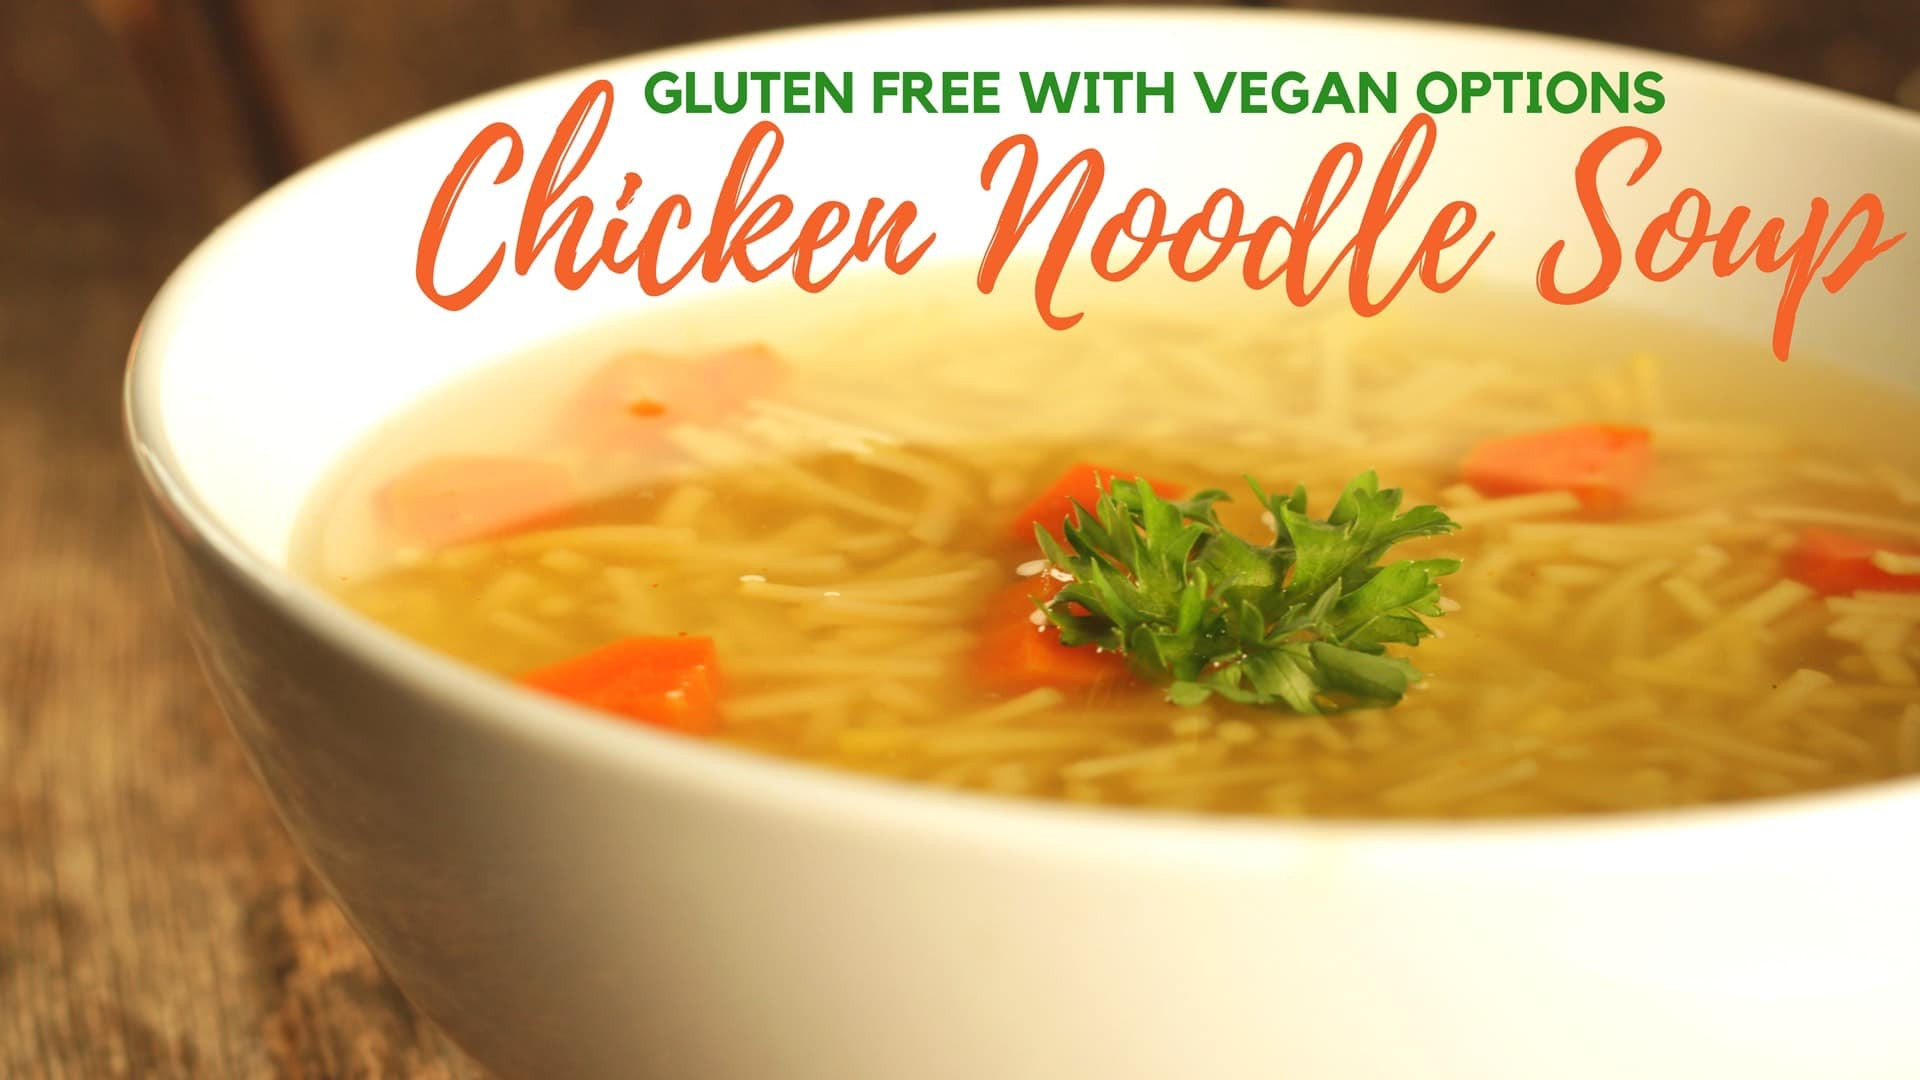 Gluten Free Dairy Free Soup Recipes
 The BEST Gluten Free Chicken Noodle Soup Recipe with Vegan